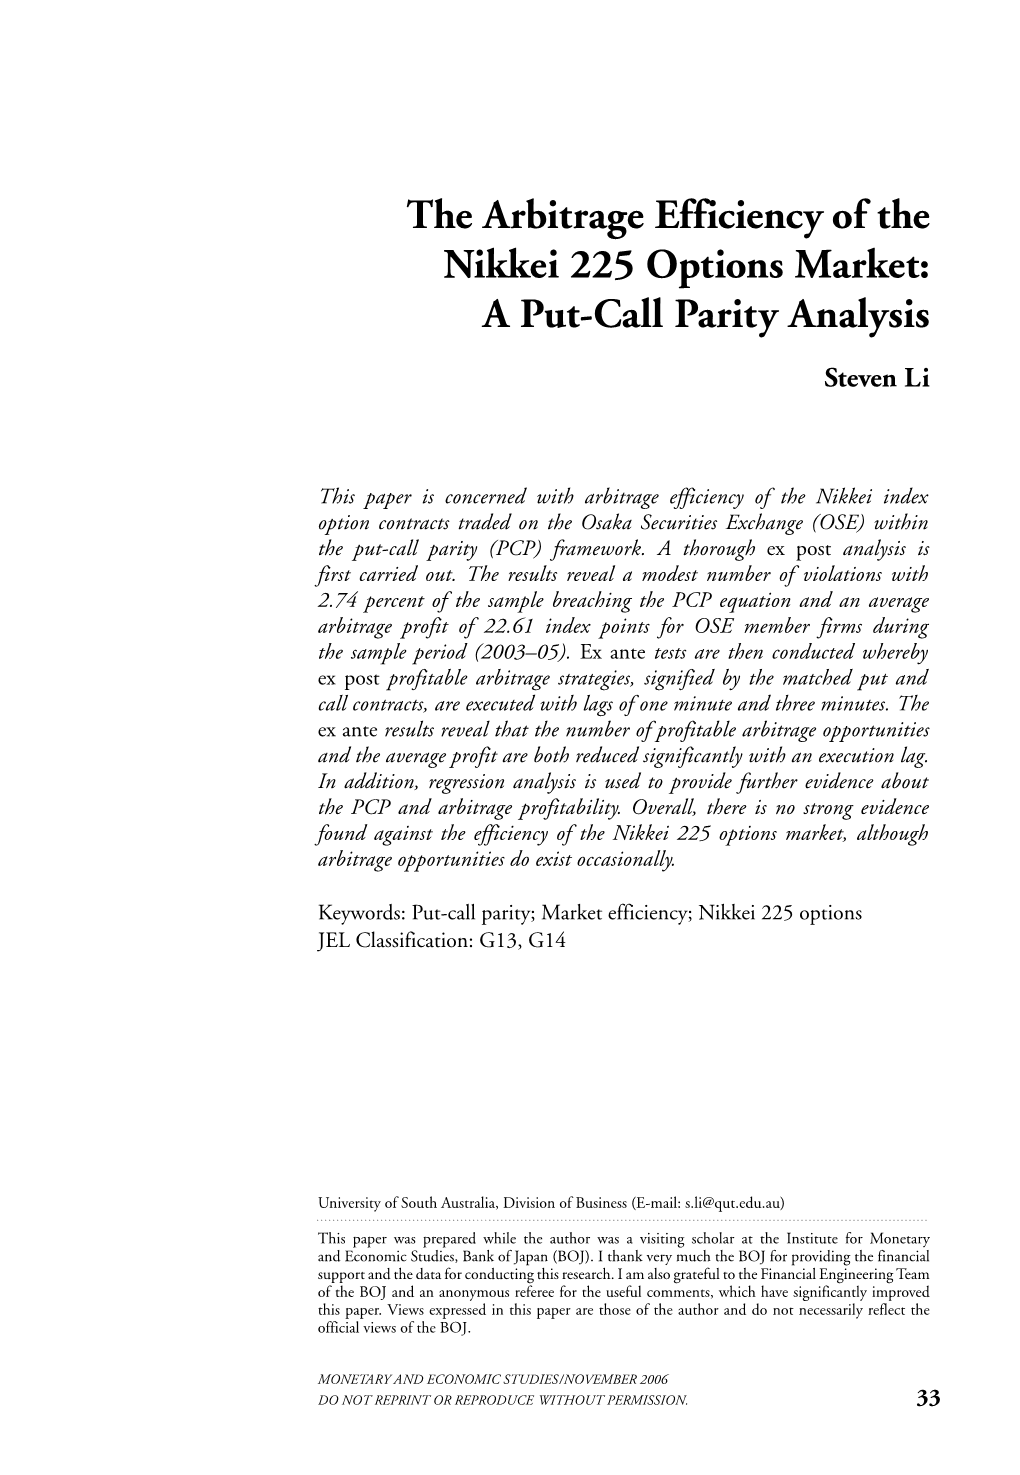 The Arbitrage Efficiency of the Nikkei 225 Options Market: a Put-Call Parity Analysis